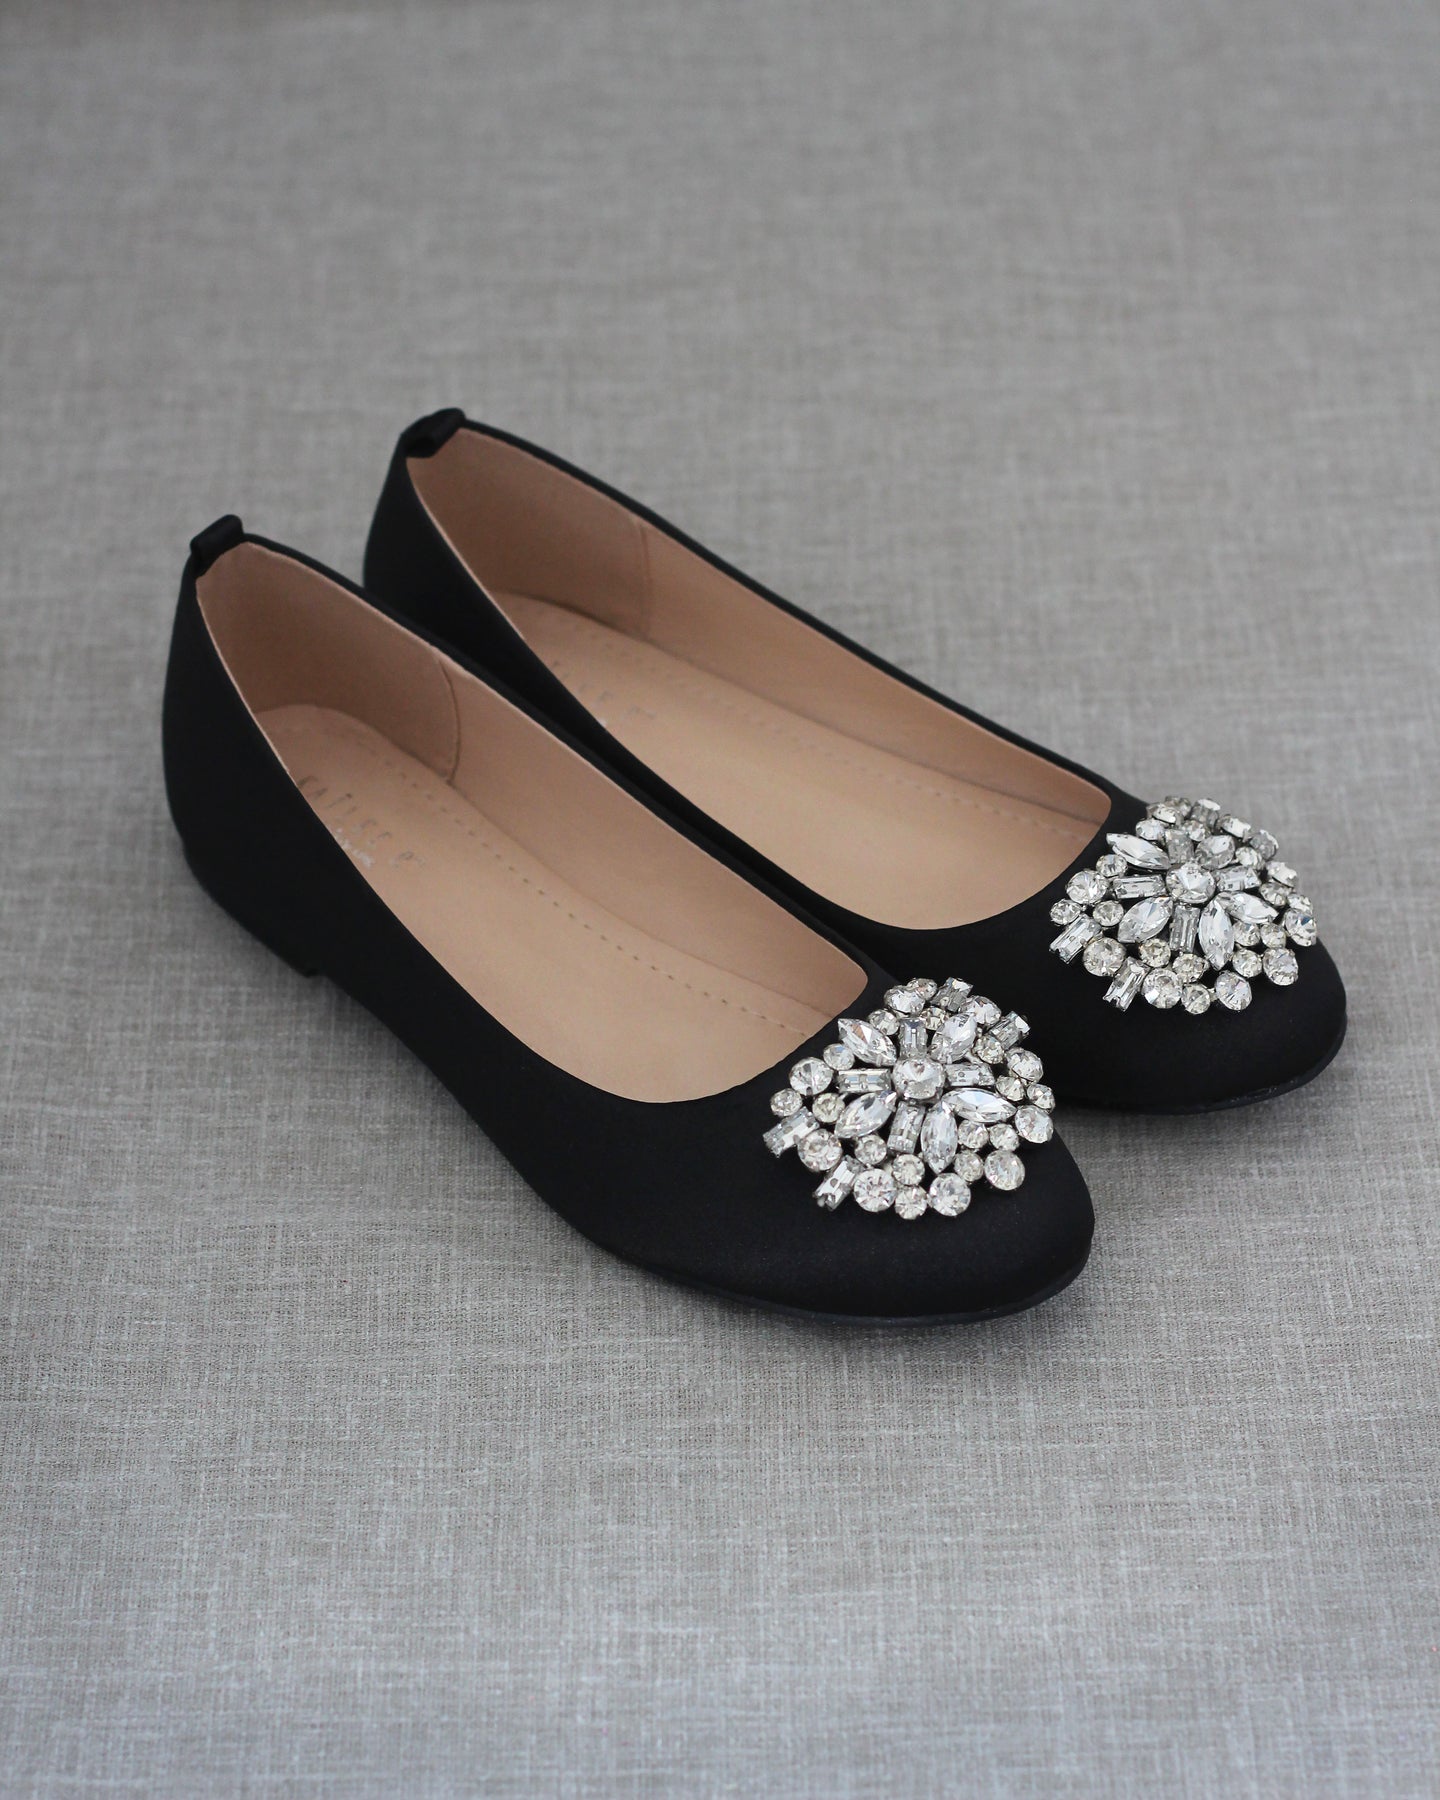 Black Shoes - Women Formal Shoes for Wedding and Evening – Kailee P. Inc.